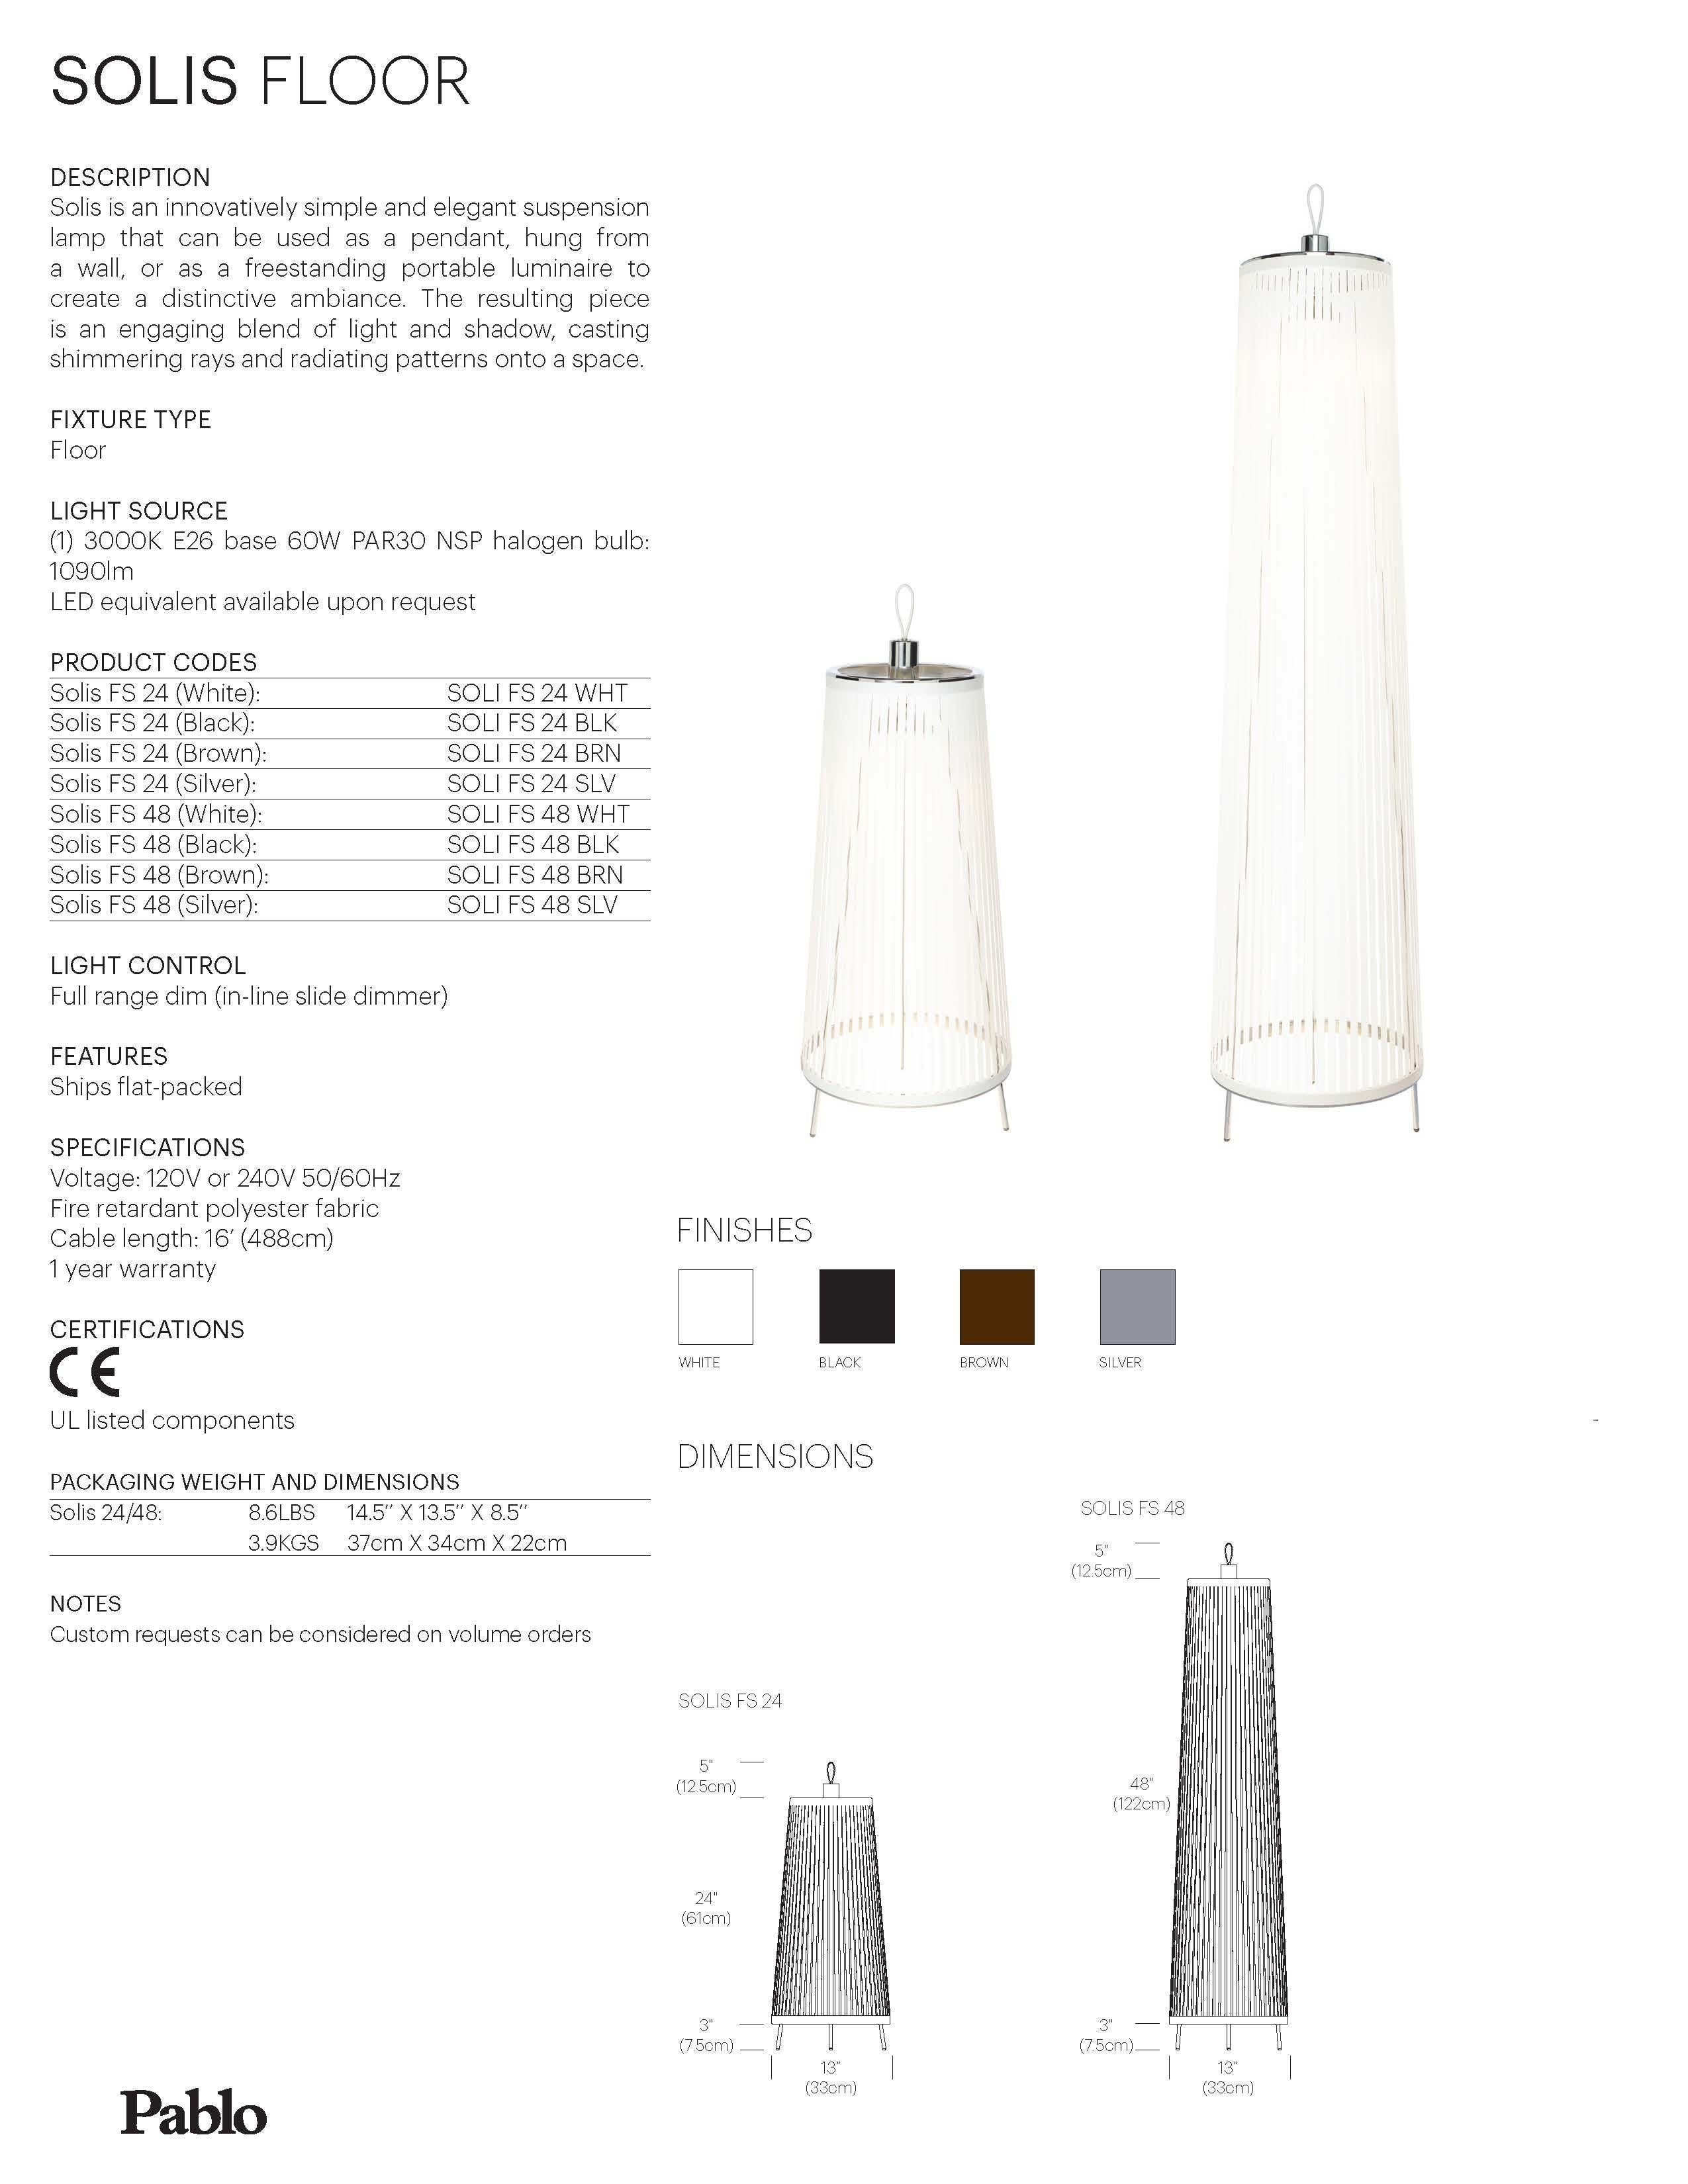 Contemporary Solis 24 Freestanding Lamp in White by Pablo Designs